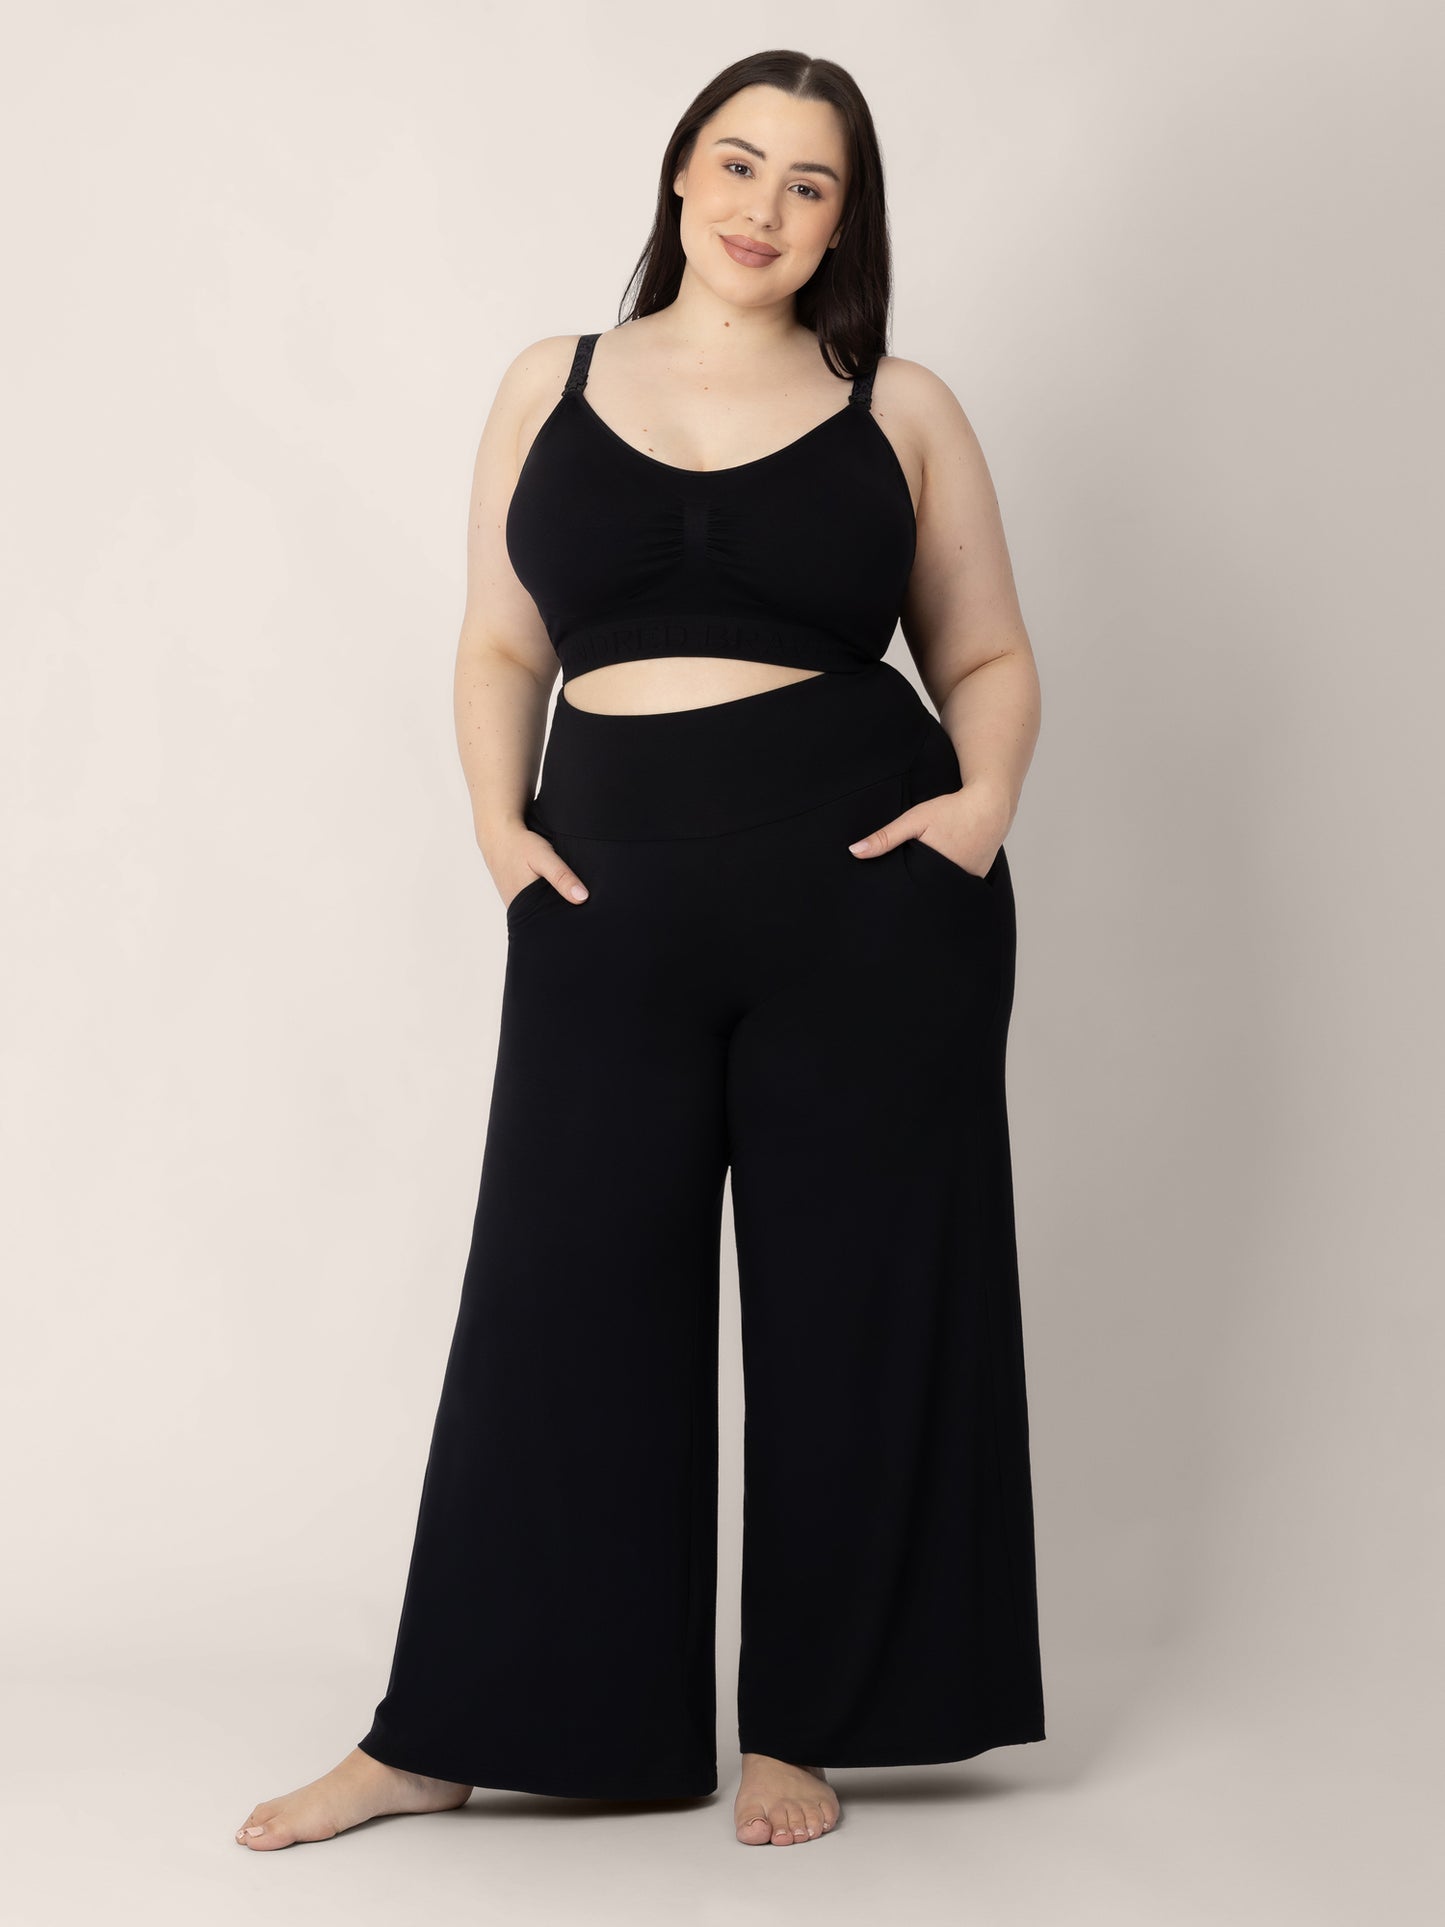 Pregnant model wearing the Bamboo Wide Leg Maternity & Postpartum Lounge Pant in black, along with Sublime® Hands-Free Pumping & Nursing Sports Bra in black